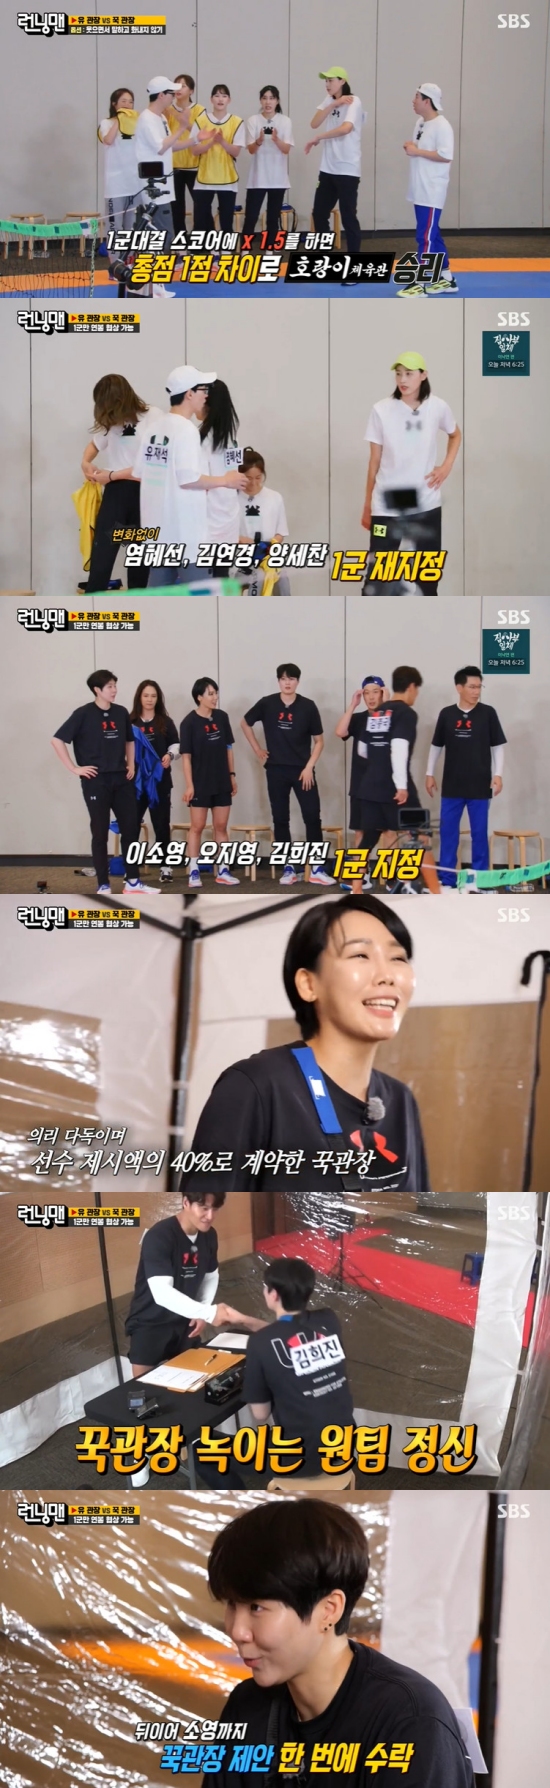 On SBS Running Man broadcasted on the 3rd, Yoo Jae-Suk and Kim Jong-kook were traded with Jeon So-min and Haha while the Yoo Chief vsak race was decorated.The day was followed by the team Yoo Jae-Suk (Yoo Jae-suk, Kim Yeon-koung, Yeum Hye-Seon, Park Eun-jin, Ahn Hye-jin, Jeon So-min, Yang Se-chan) and Kim Jong-kook (Kim Jong-kook, Kim Hee-jin, Oh Ji-young, Lee So-young, Ji Suk-jin, Haha, and Song Ji-hyo) were divided into 1st and 2nd groups and set out for the foot volleyball Battle.Kim Jong-kook team was selected as first group Oh Ji-young, Lee So-young, Haha and second group Kim Hee-jin, Ji Suk-jin and Song Ji-hyo, while Yoo Jae-Suk team was selected as first group Kim Yeon-koung, Yeum Hye-Seon, Yang Se-chan and second group Park Eun-jin, Ahn Hy It consists of e-jin and jeon So-min.Kim Jong-kook and Yoo Jae-Suk participated in the first-team game, and each of them picked Oh Ji-young and Jeon So-min as captains.Kim Jong-kooks team won first-team Battle, while Yoo Jae-Suks team won second-team Battle.However, Kim Jong-kooks team earned a prize money of 400,000 One with an additional score, and Yoo Jae-Suks team got 200,000 One.The production team then said they would do Salary Movie - The Negotiation again.Yoo Jae-Suk performed Yeum Hye-Seon, Kim Yeon-koung, Yang Se-chan and Movie - The Negotiation, while Kim Jong-kook performed Lee So-young, Oh Ji-young, Kim Hee-jin and Movie - The Negotiation.Second-team players were not given the Salary Movie - The Negotiation opportunity, and they were able to trade teams by consulting each other.Kim Jong-kook ended Movie - The Negotiation with 200,000 Oji Young, 170,000 Kim Hee-jin, and 170,000 Lee So Young, while Yoo Jae-Suk ended Yeum Hye-seon 120,000 One, Kim Yeon-koung 230,000 One, Yang Se-chan 30,000 One - The Negotiation succeeded.At this time, Kim Hee-jin said, I will receive 170,000 One, so give me one more player in the second group.Kim Yeon-koung also found out that Yoo Jae-Suk gives a low Salary compared to Kim Jong-kook team, and said, You have to give it well.You have to give me the first Jessie amount, and I know how I treat you outside. Kim Yeon-koung said he Jessey for 300,000 One with Hope Salary, and (Kim Jong-kook team) they said they got 300,000 Ones, he lied.Yoo Jae-Suk immediately noticed Kim Yeon-koungs lies, and referred to Lee Kwangsoo, saying, You are Kwangsoo.Furthermore, Kim Yeon-koung said, What strength do I work hard for? I will do only 130,000 One. What about 130,000 One?I mean, Im not gonna let you stay. I want to work hard. I want to be immersed in this.I will have a passion if you give me 300,000 One. He finally got 230,000 One and Movie - The Negotiation.Later, the cast performed a high-altitude Styrofoam mission.Kim Yeon-koung was active thanks to his big height, and Yoo Jae-Suk was delighted to say, I found Kwangsoo Successor.The Yoo Jae-Suk team took first place, and the first-team players removie Salary - The Negotiation.In particular, Yoo Jae-Suk decided on the trade of Jeon So-min, and Kim Jong-kook told him to take Ji Suk-jin instead of accepting Jeon So-min.Yoo Jae-Suk quipped numbly, saying Give him 100,000 One for Ji Suk-jin; after all, Jeon So-min and Haha were traded for the first time.Photo = SBS broadcast screen